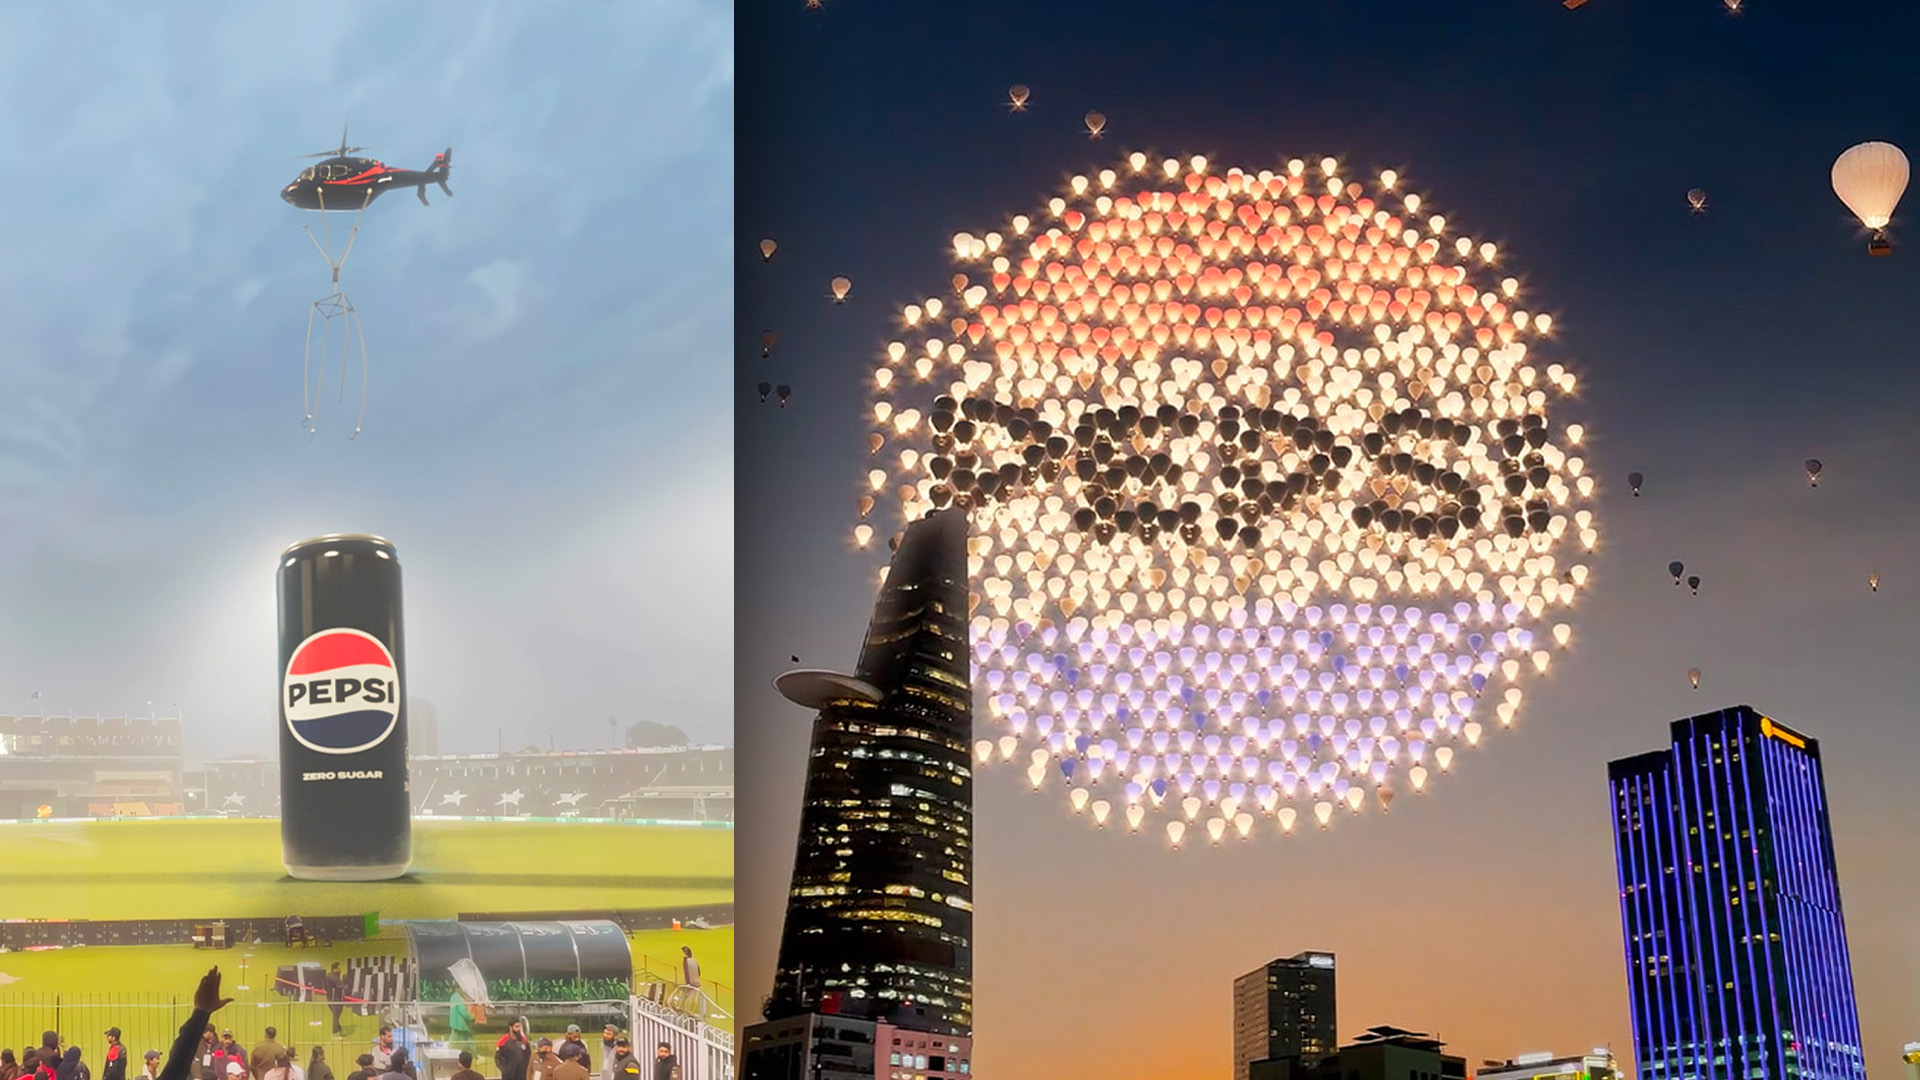 Pepsi Unveil New Logo By Taking Over Global Landmarks